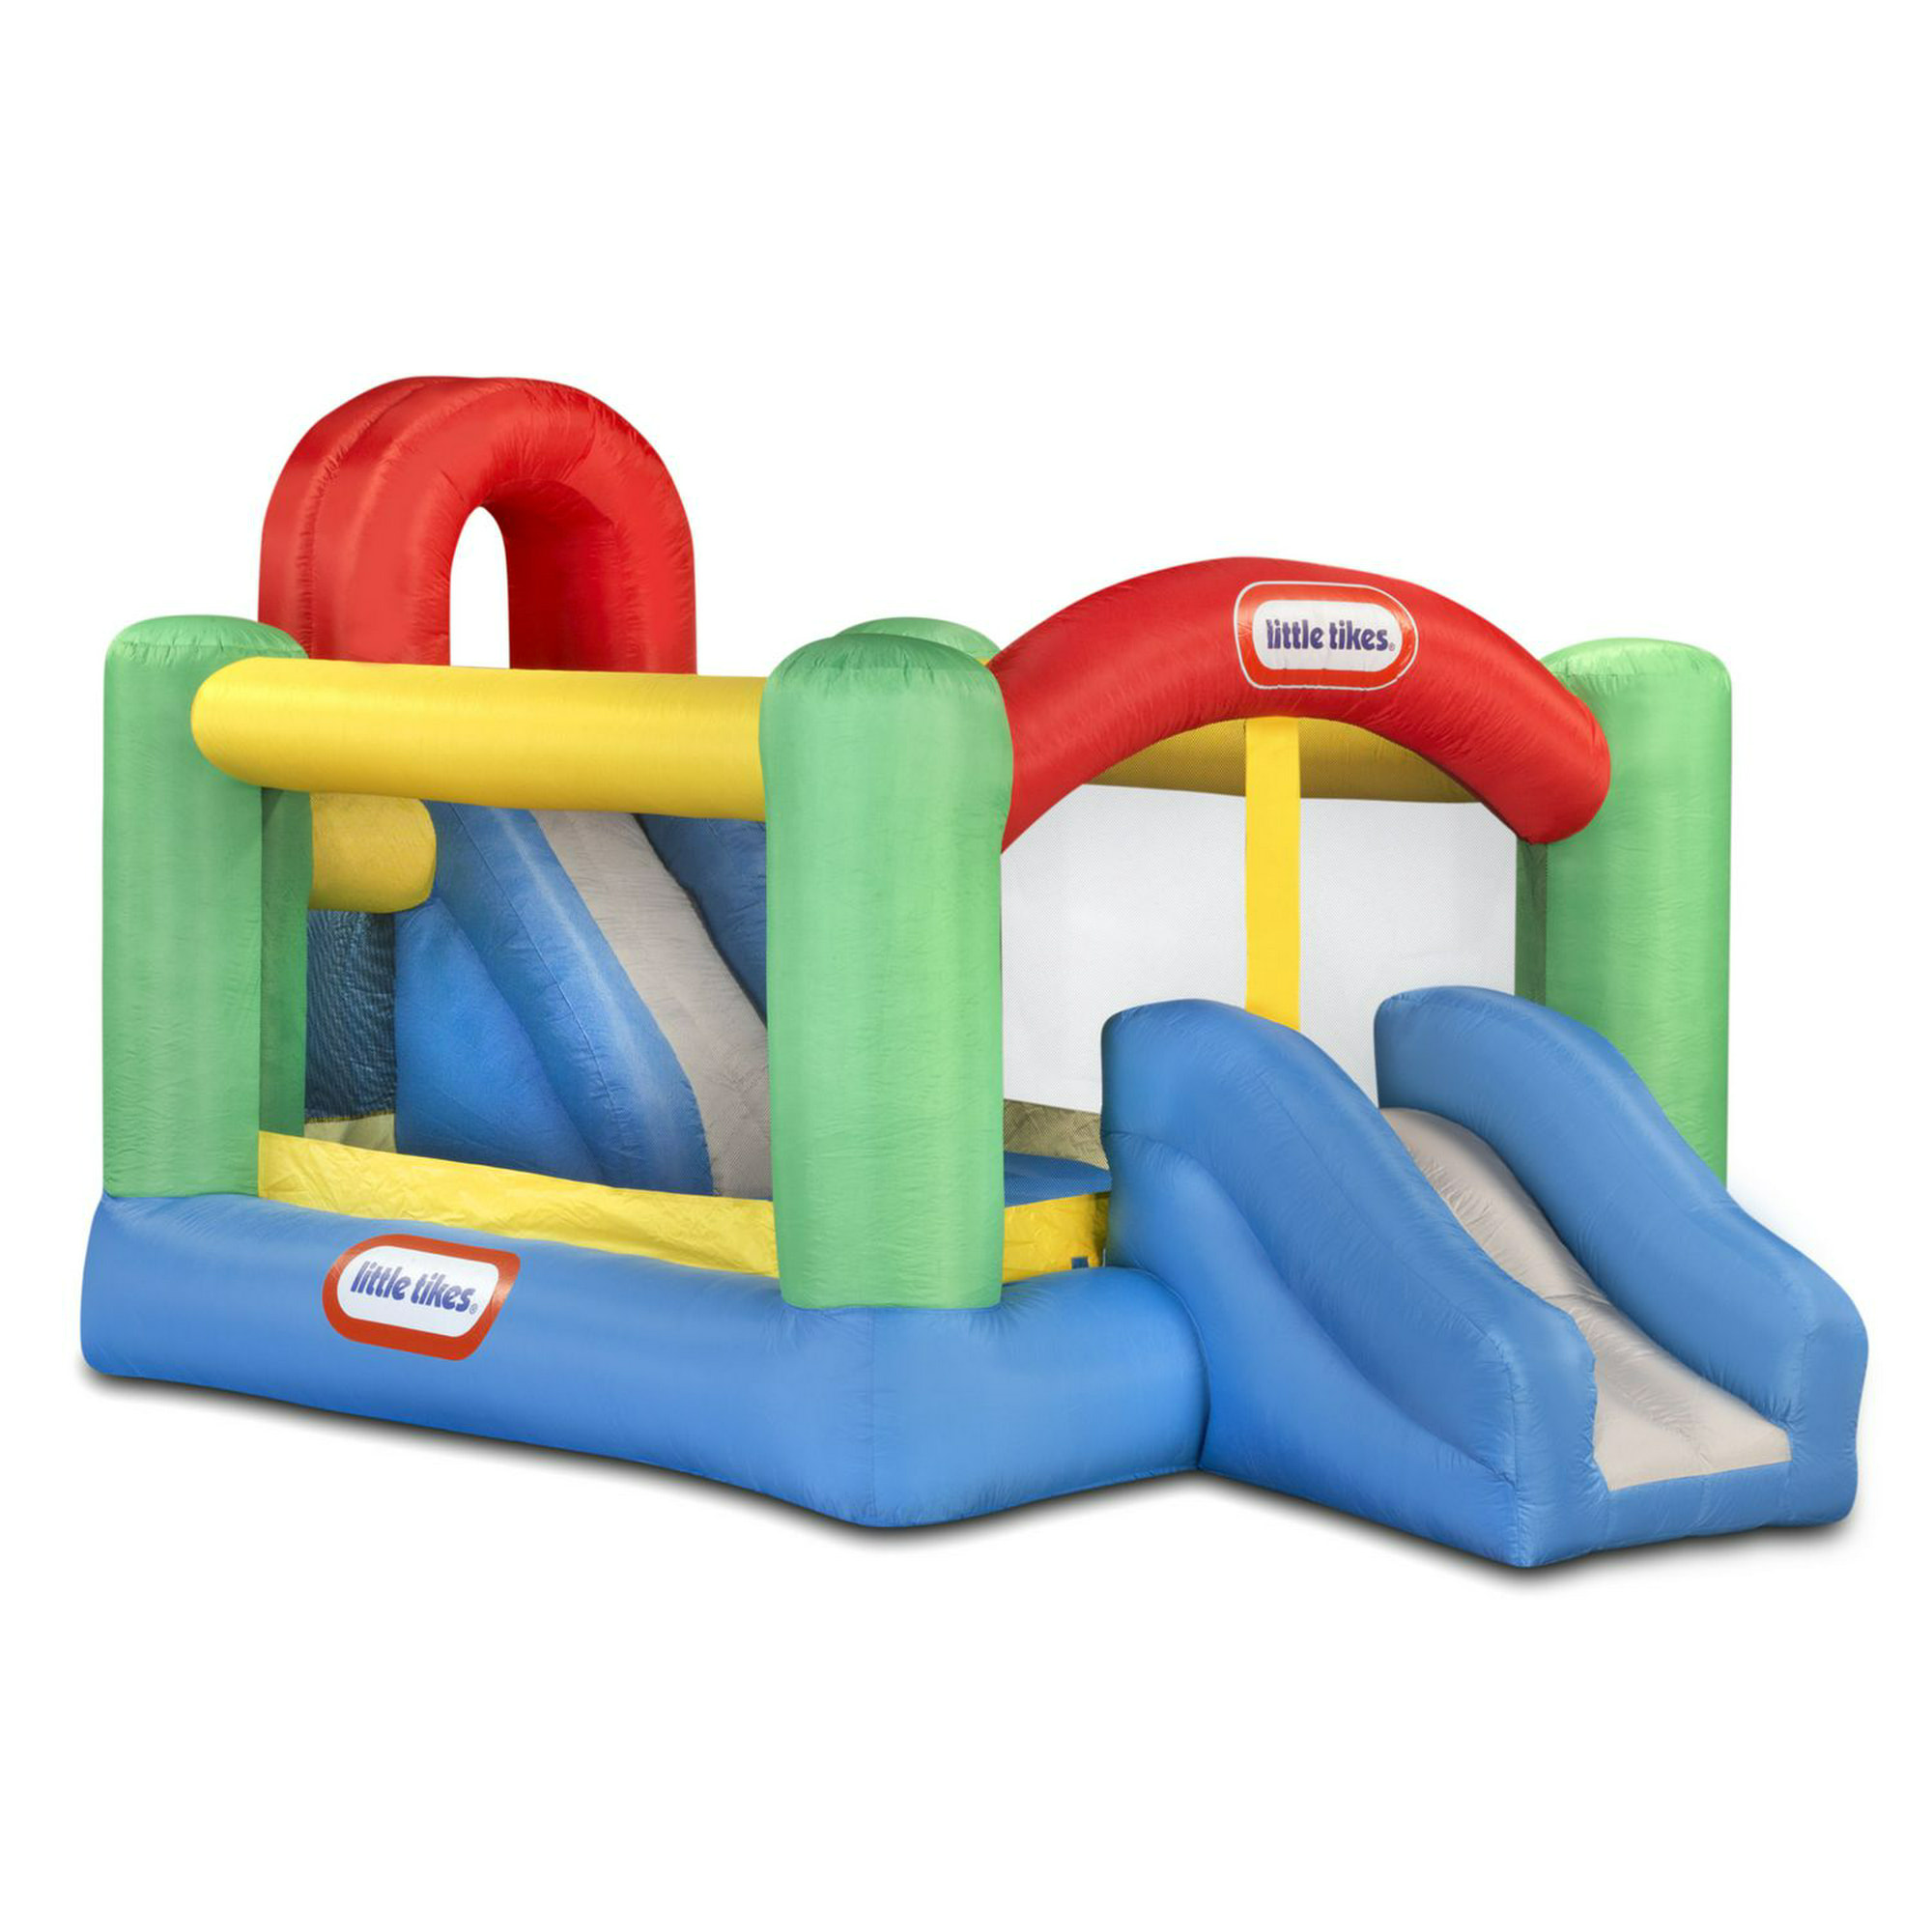 Little Tikes Jump 'n Slide 9'x12' Inflatable Bouncer, Inflatable